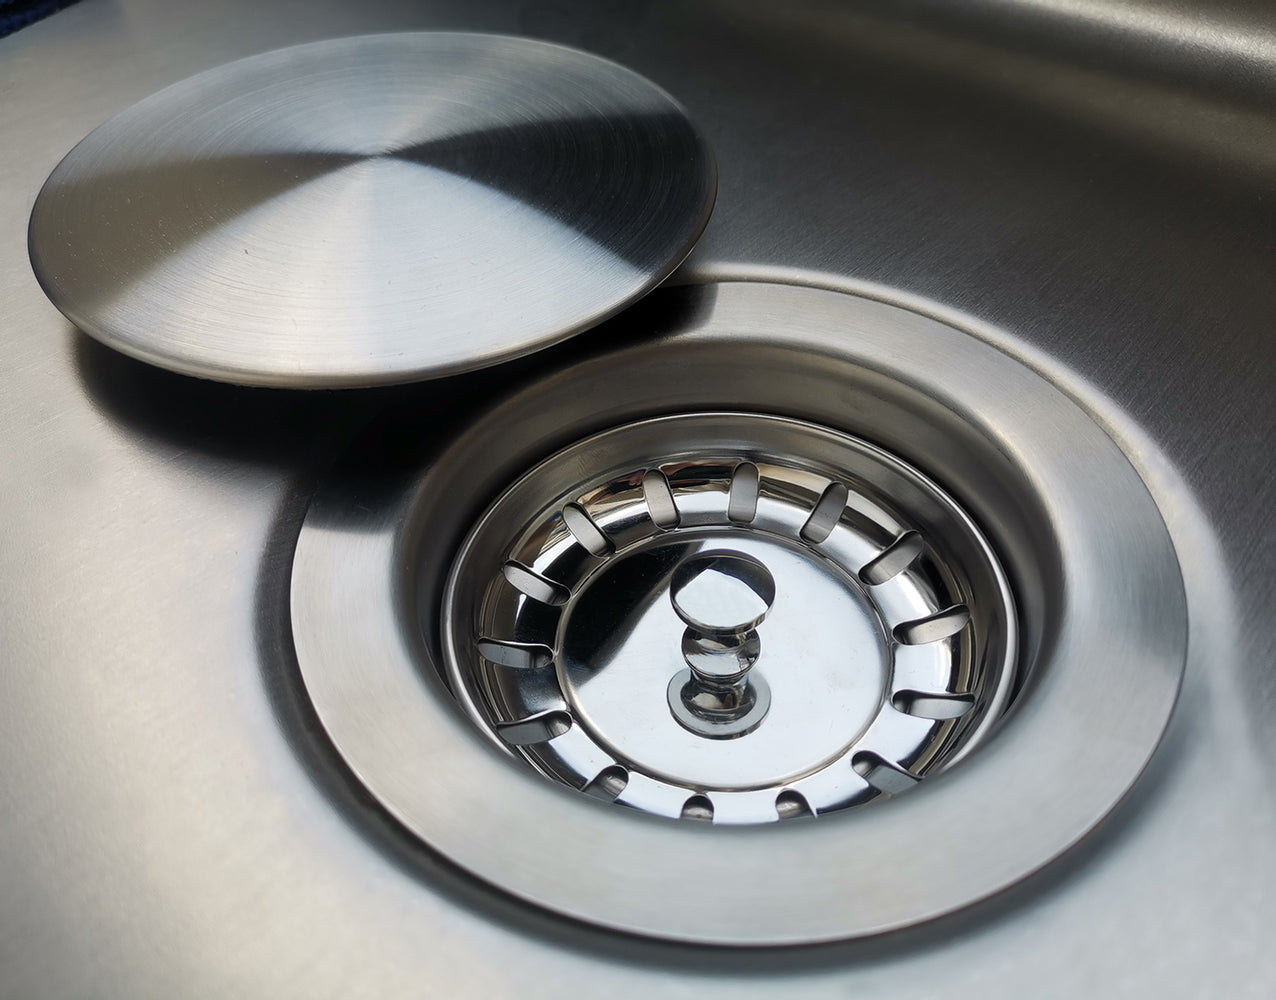 drain covers for kitchen sink